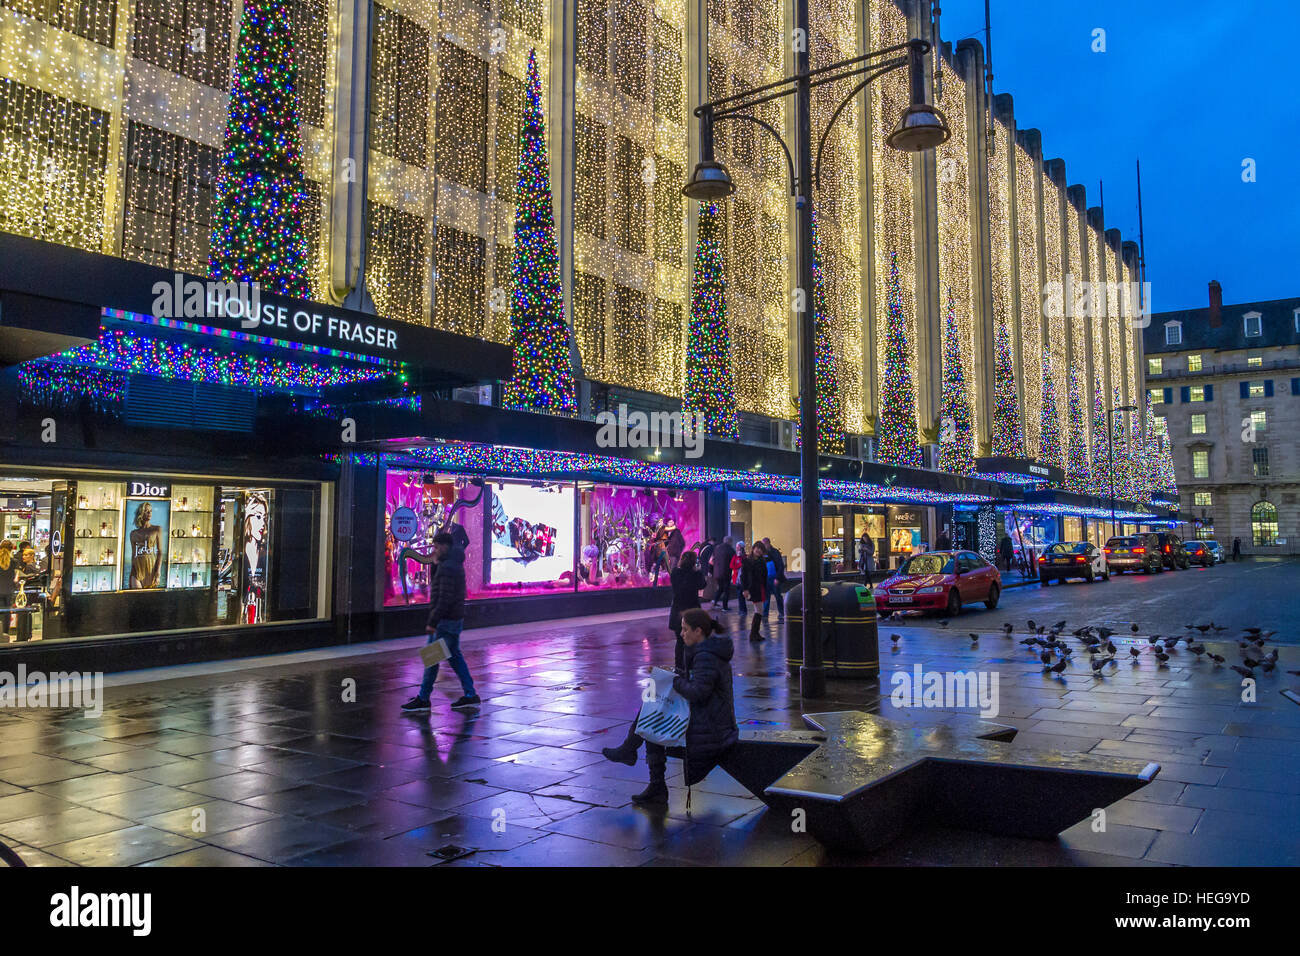 The House Of Fraser on London's Oxford St at Christmas time decorated in Christmas lights, Oxford St, London,UK Stock Photo